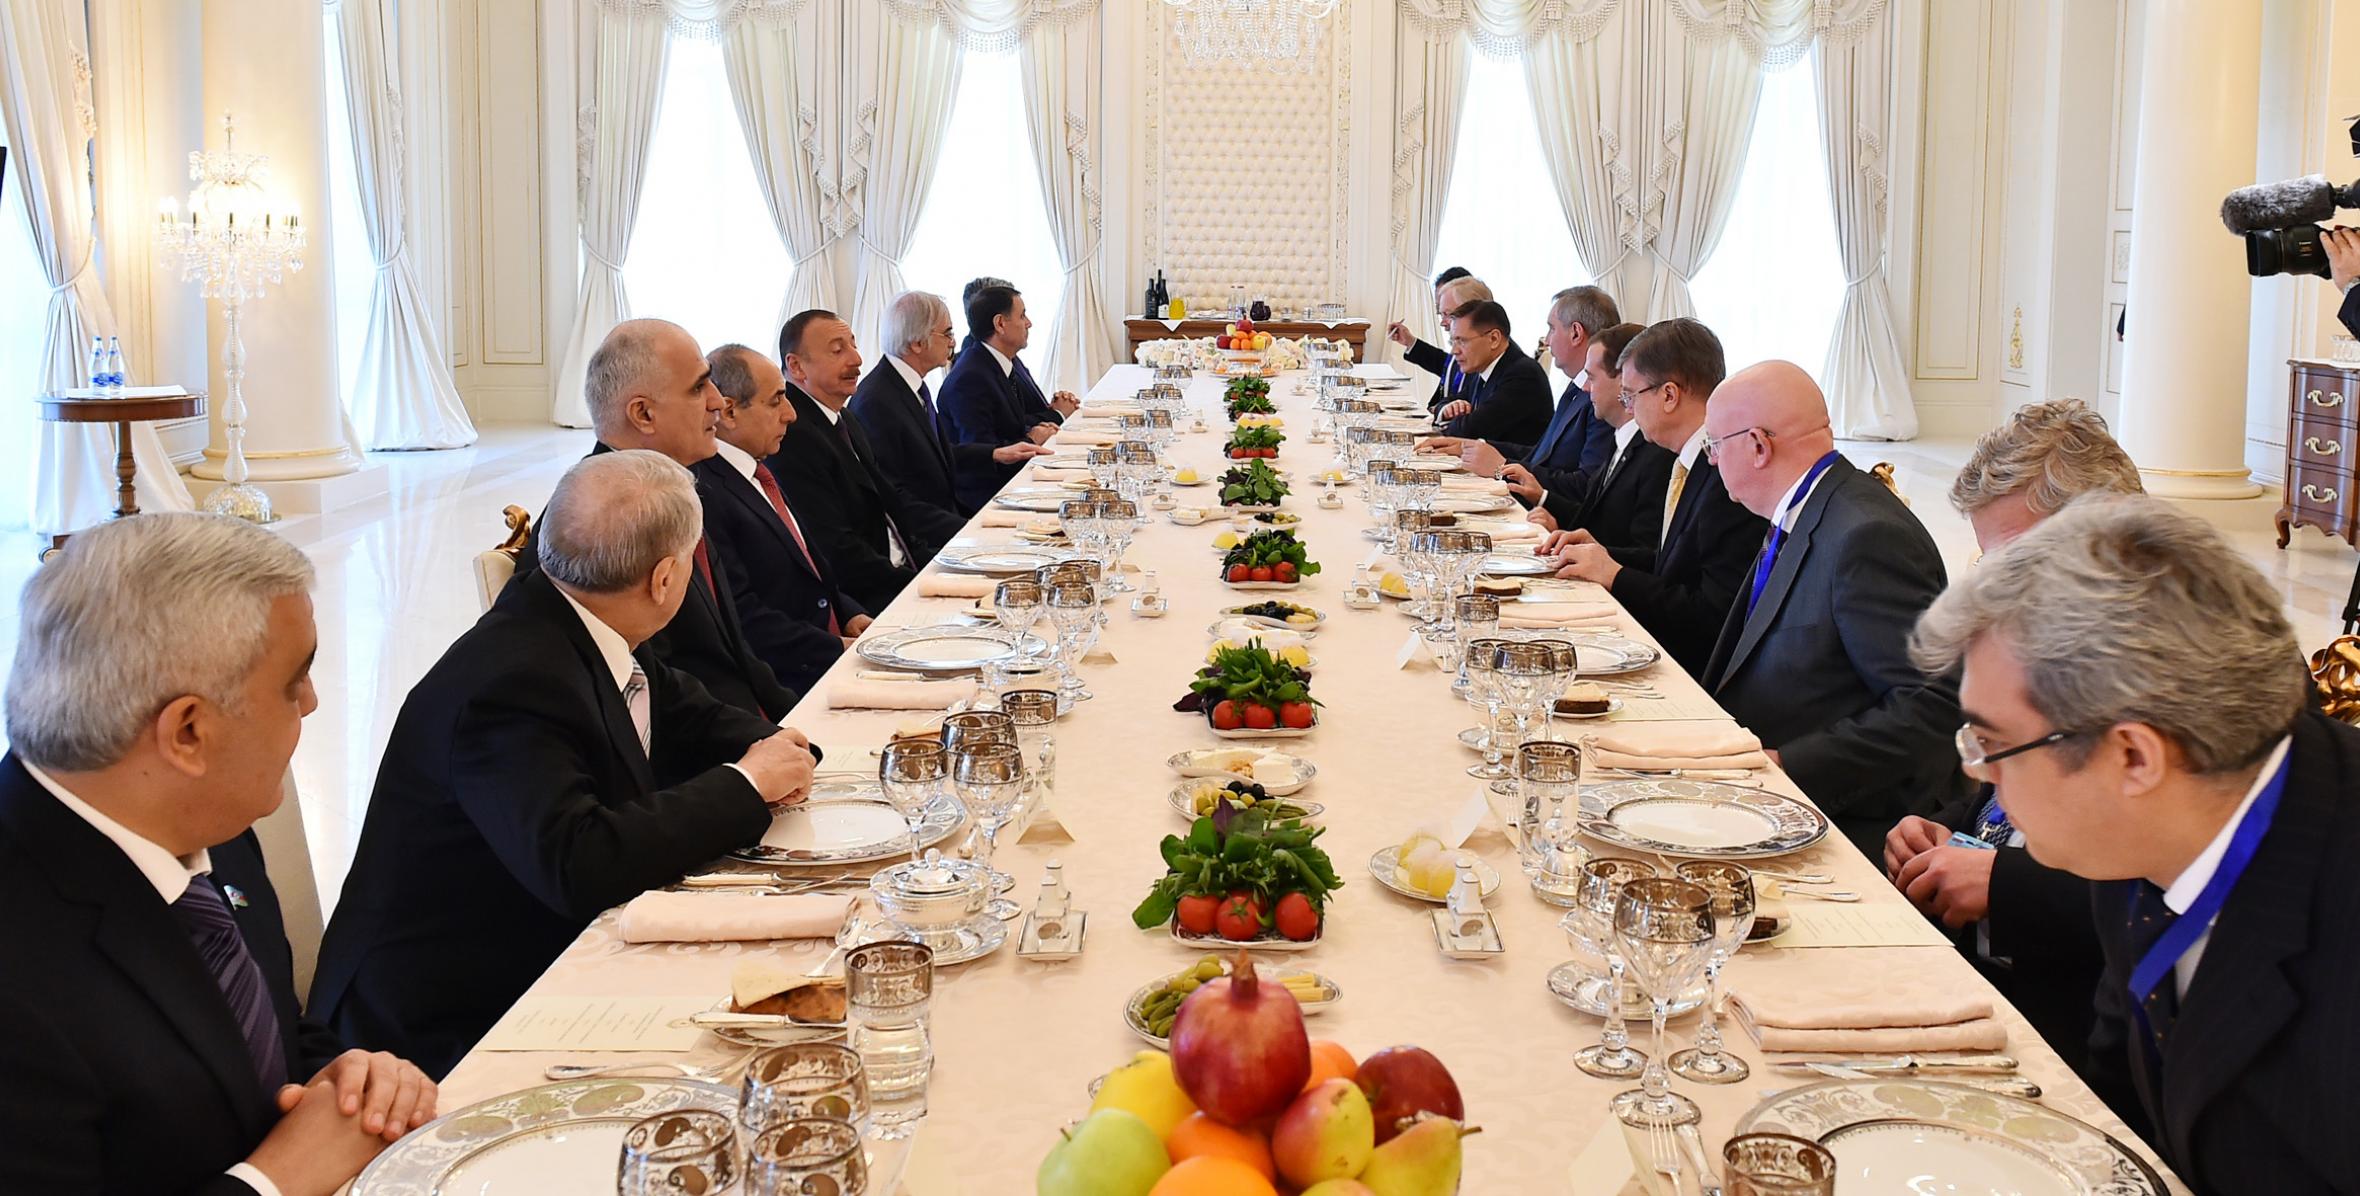 Dinner reception was hosted on behalf of İlham Aliyev in honor of Chairman of the Russian government